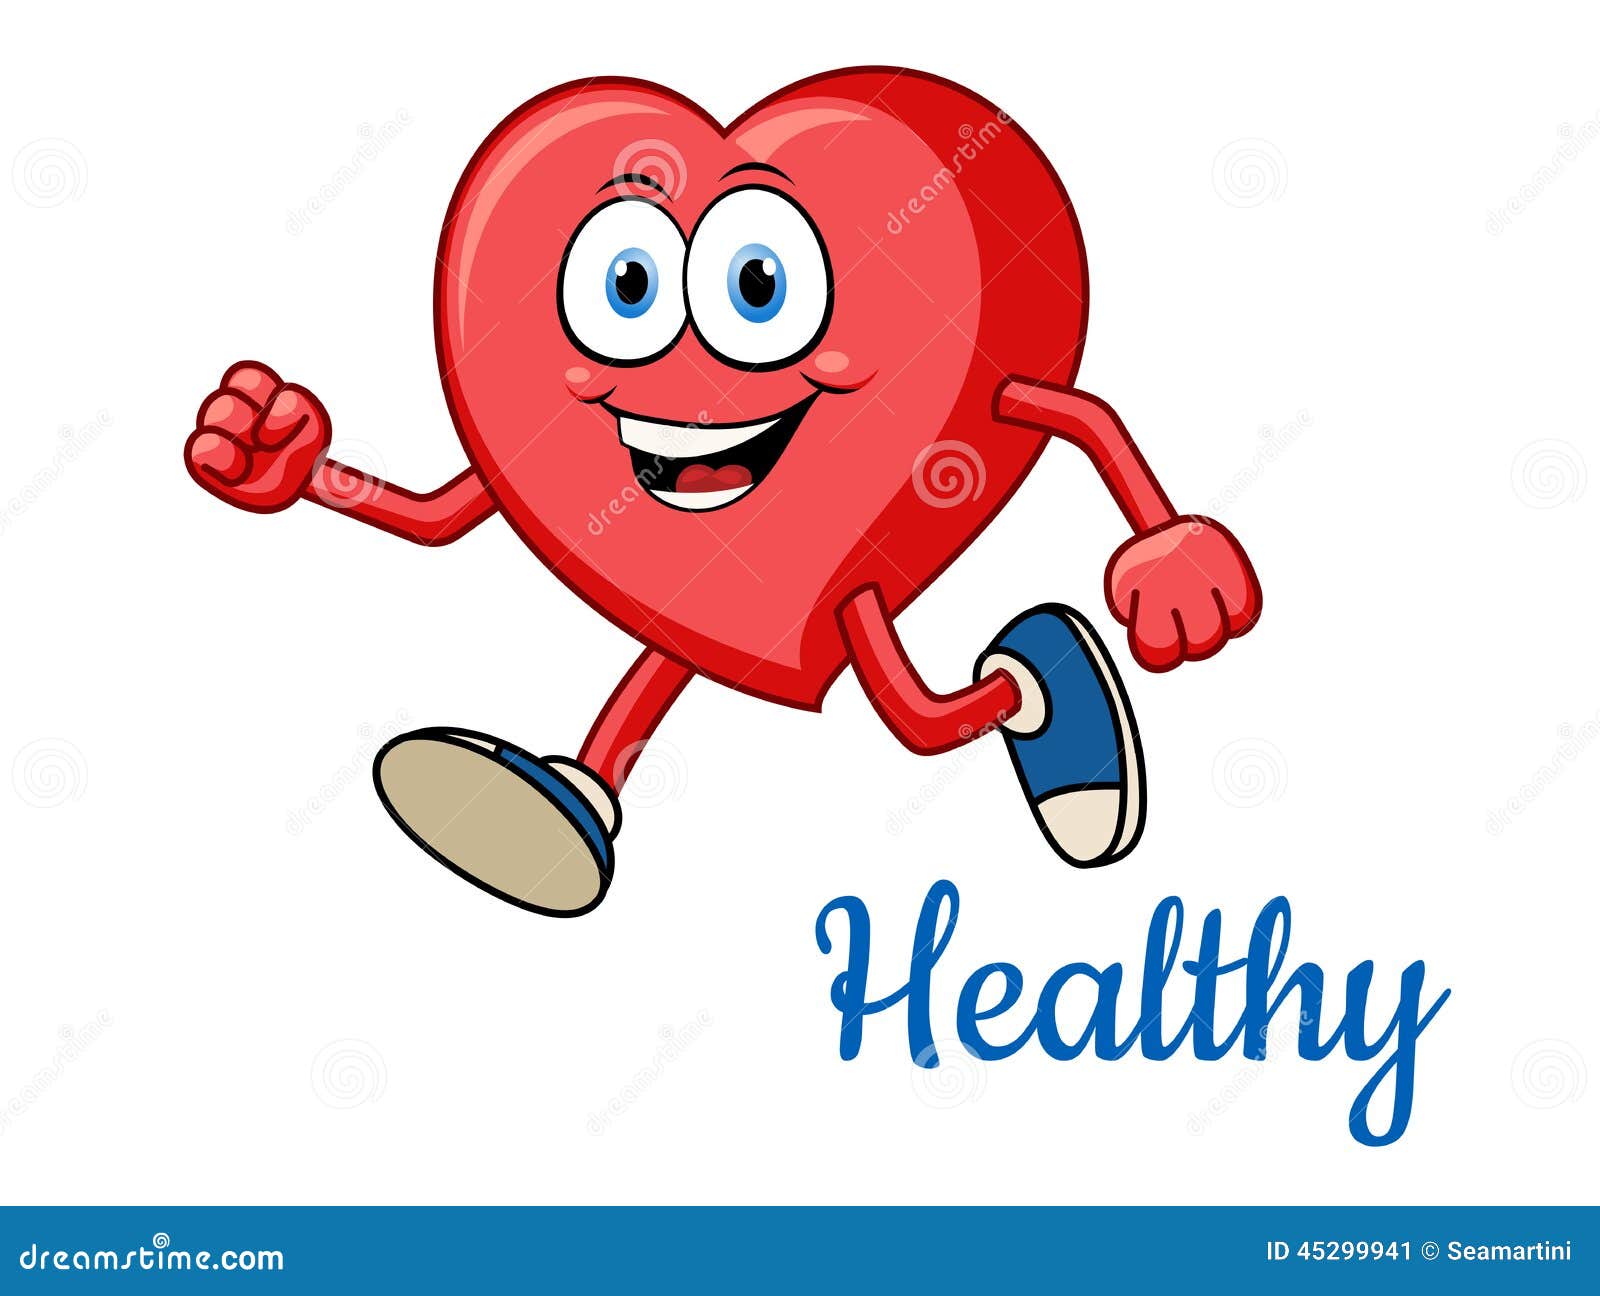 Running Healthy Red Heart Character Stock Vector ...